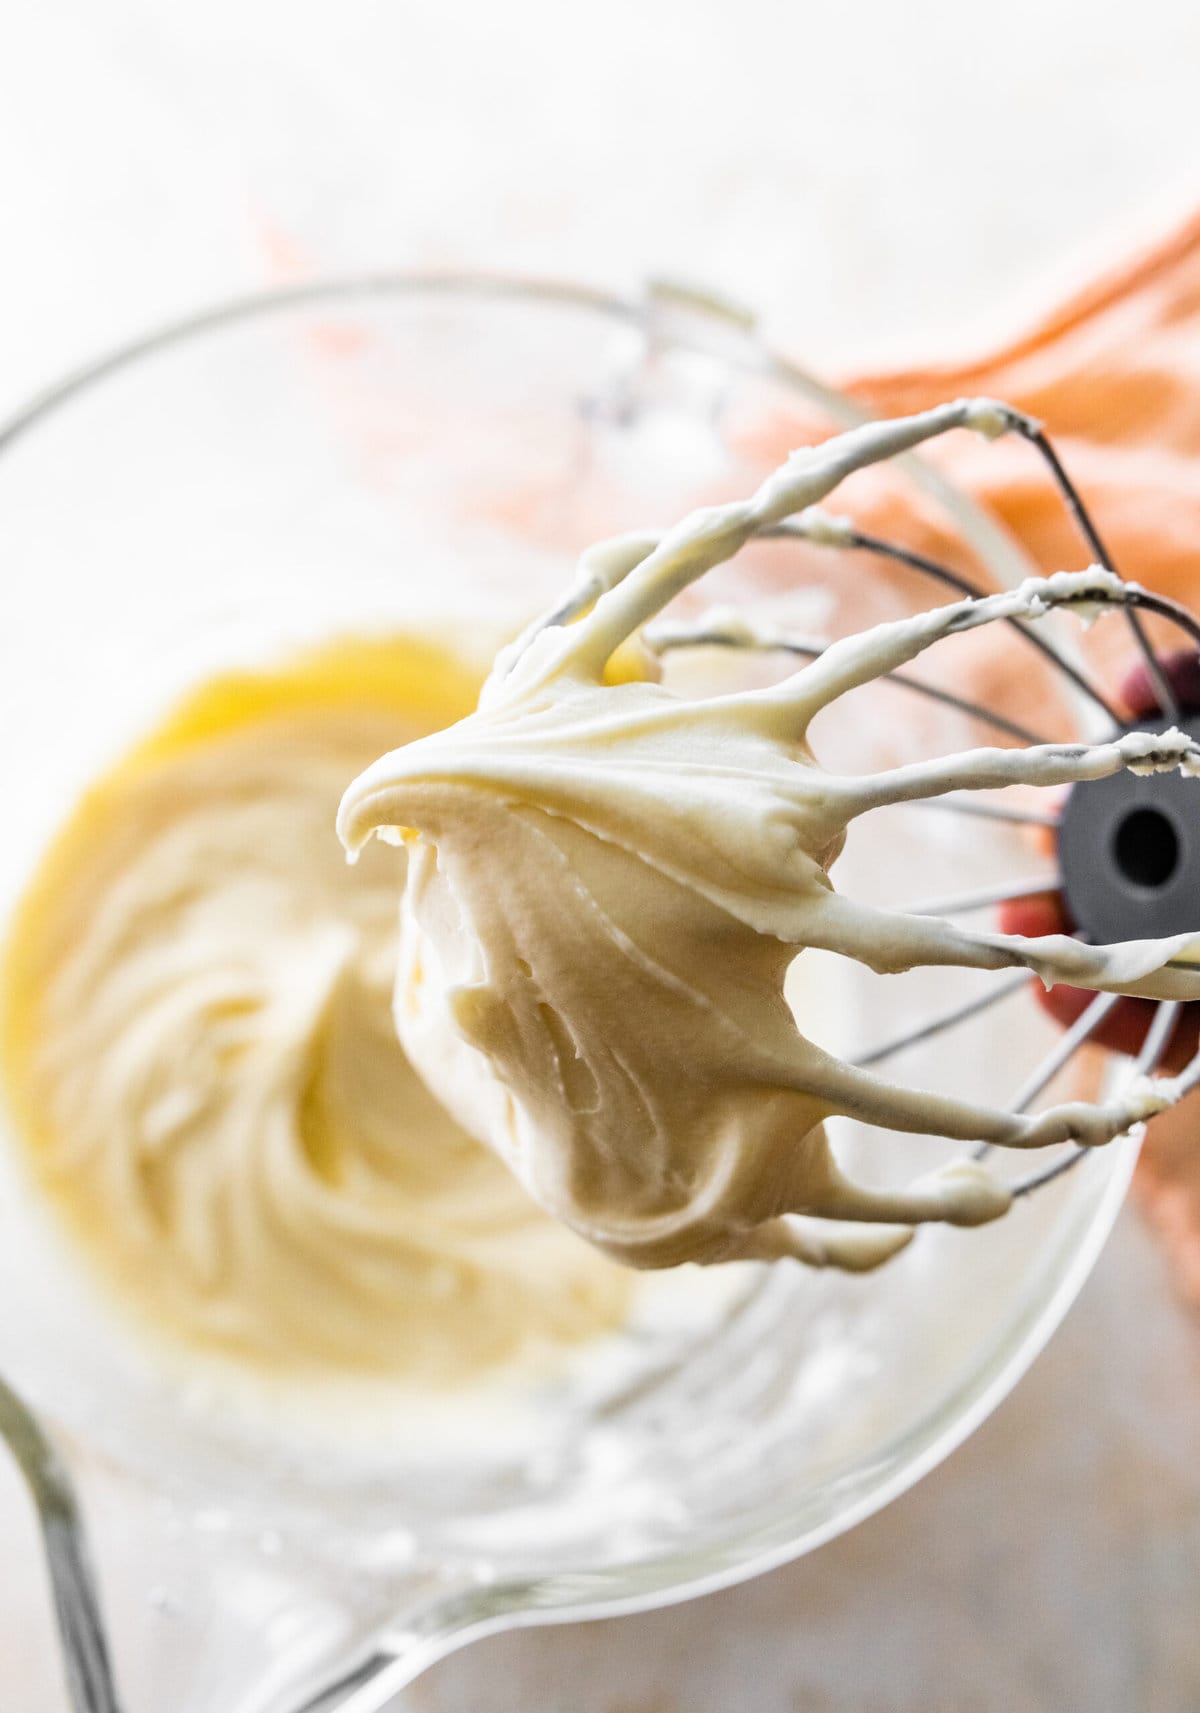 How to make cream cheese frosting step-by-step photos: mix until smooth.